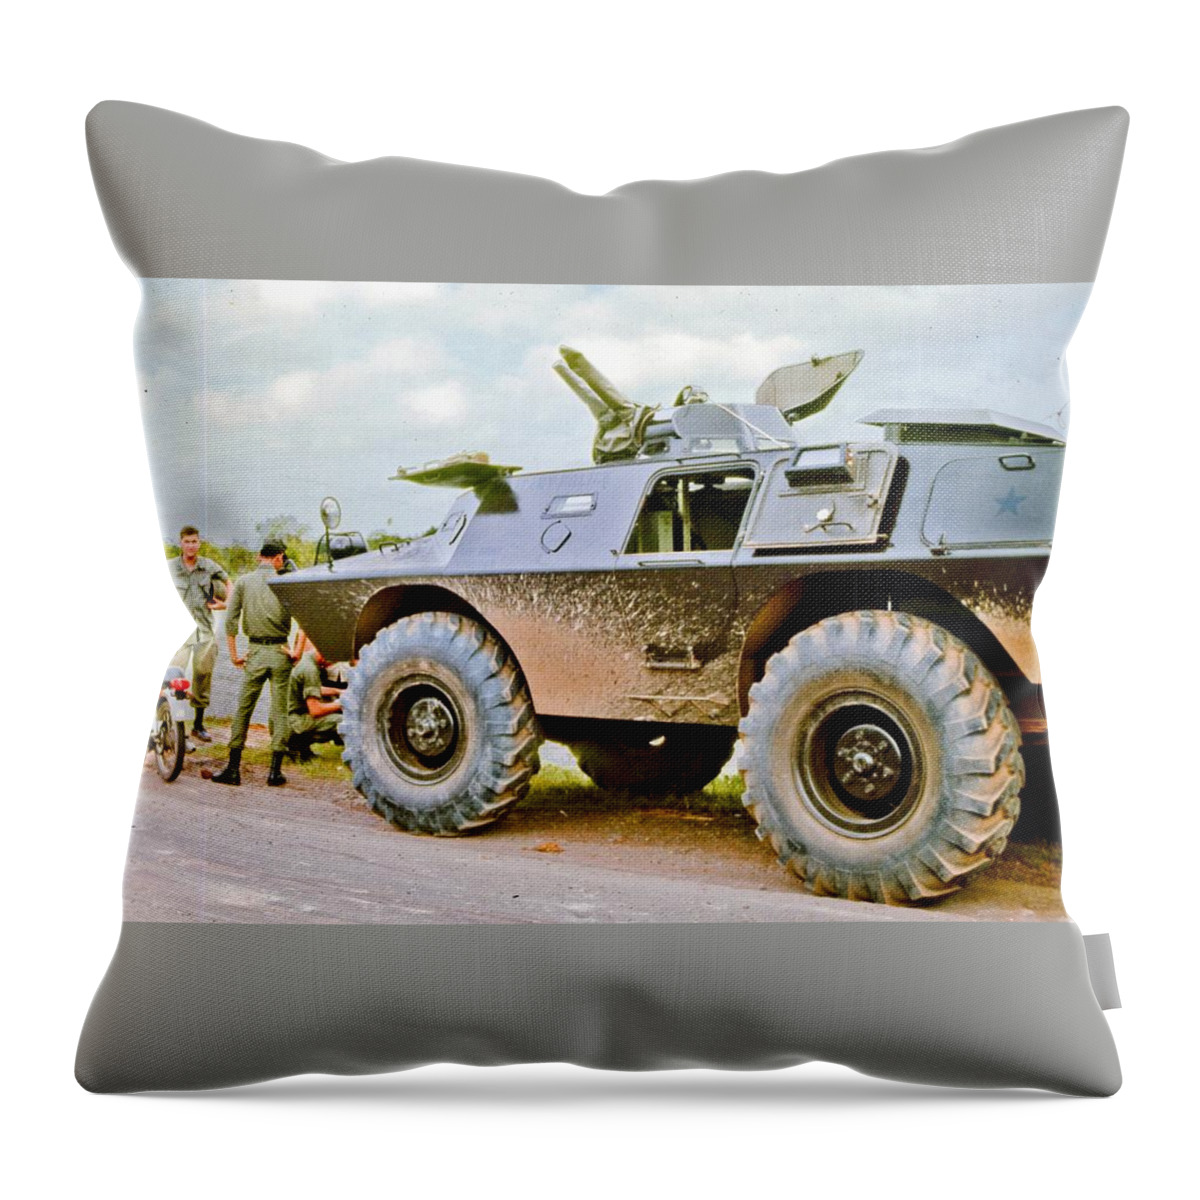 Cadillac Gage Commando Throw Pillow featuring the photograph Cadillac Gage Commando by Mariel Mcmeeking